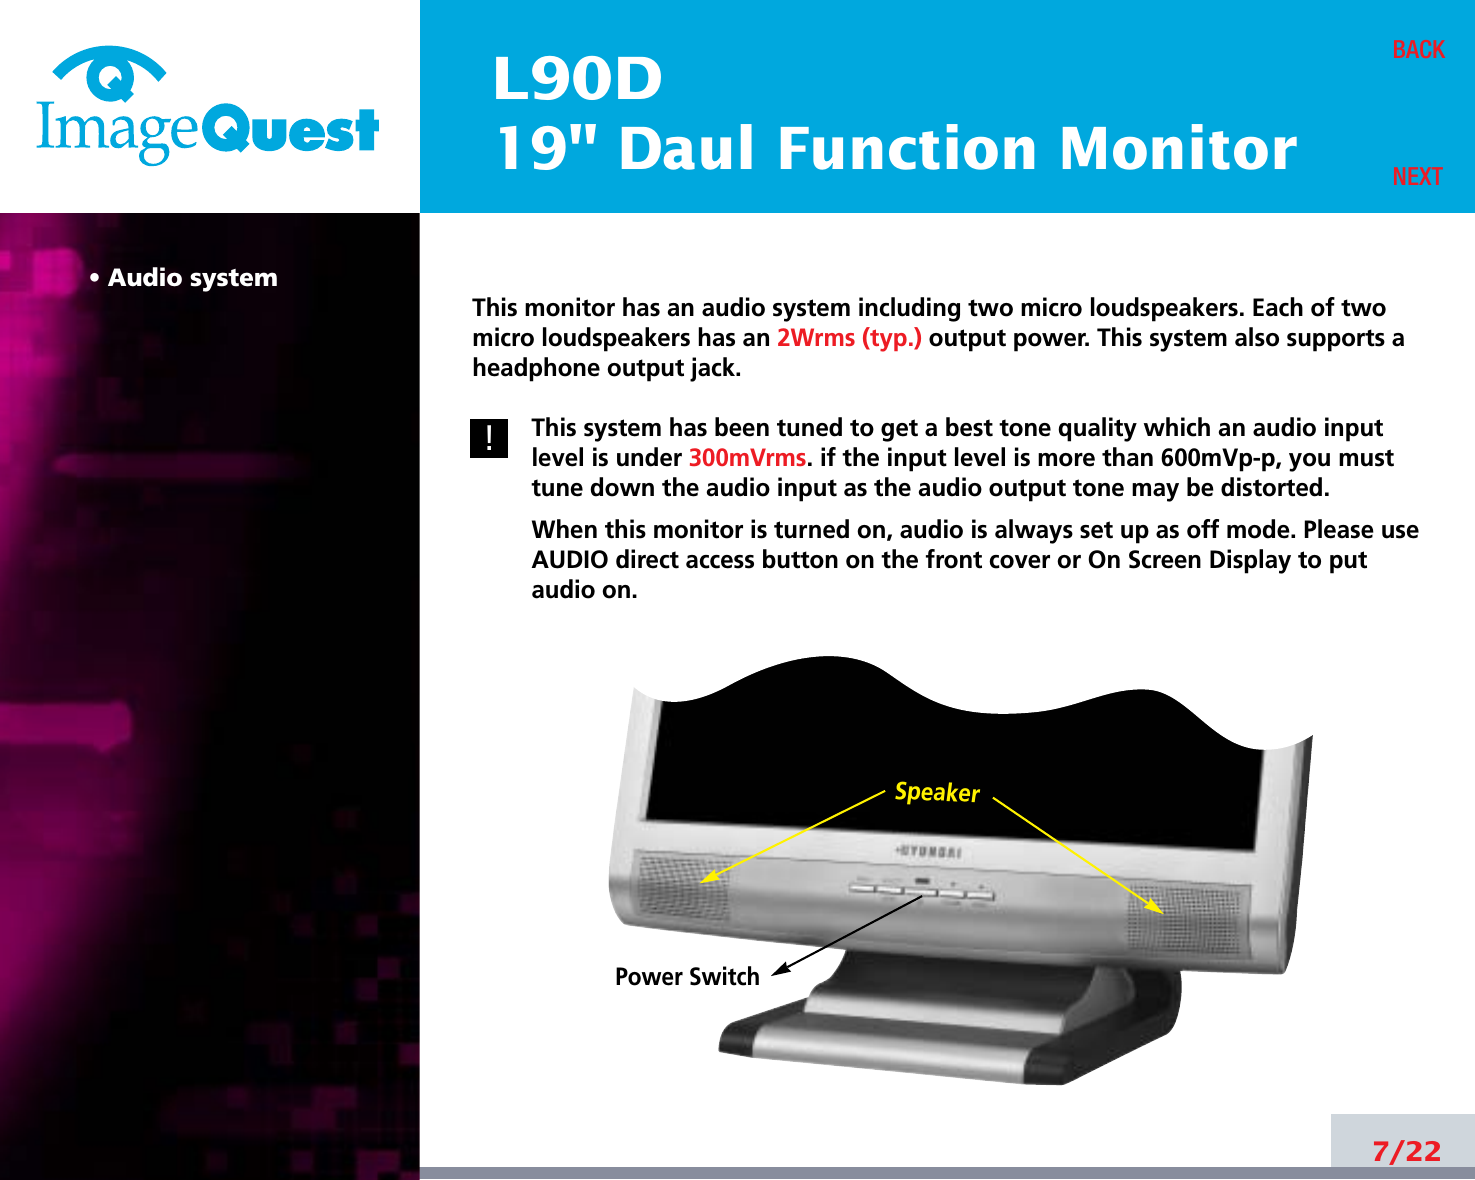 L90D19&quot; Daul Function Monitor• Audio system7/22BACKNEXT!!This monitor has an audio system including two micro loudspeakers. Each of twomicro loudspeakers has an 2Wrms (typ.) output power. This system also supports aheadphone output jack.This system has been tuned to get a best tone quality which an audio inputlevel is under 300mVrms. if the input level is more than 600mVp-p, you musttune down the audio input as the audio output tone may be distorted.When this monitor is turned on, audio is always set up as off mode. Please useAUDIO direct access button on the front cover or On Screen Display to putaudio on. Power SwitchSpeaker